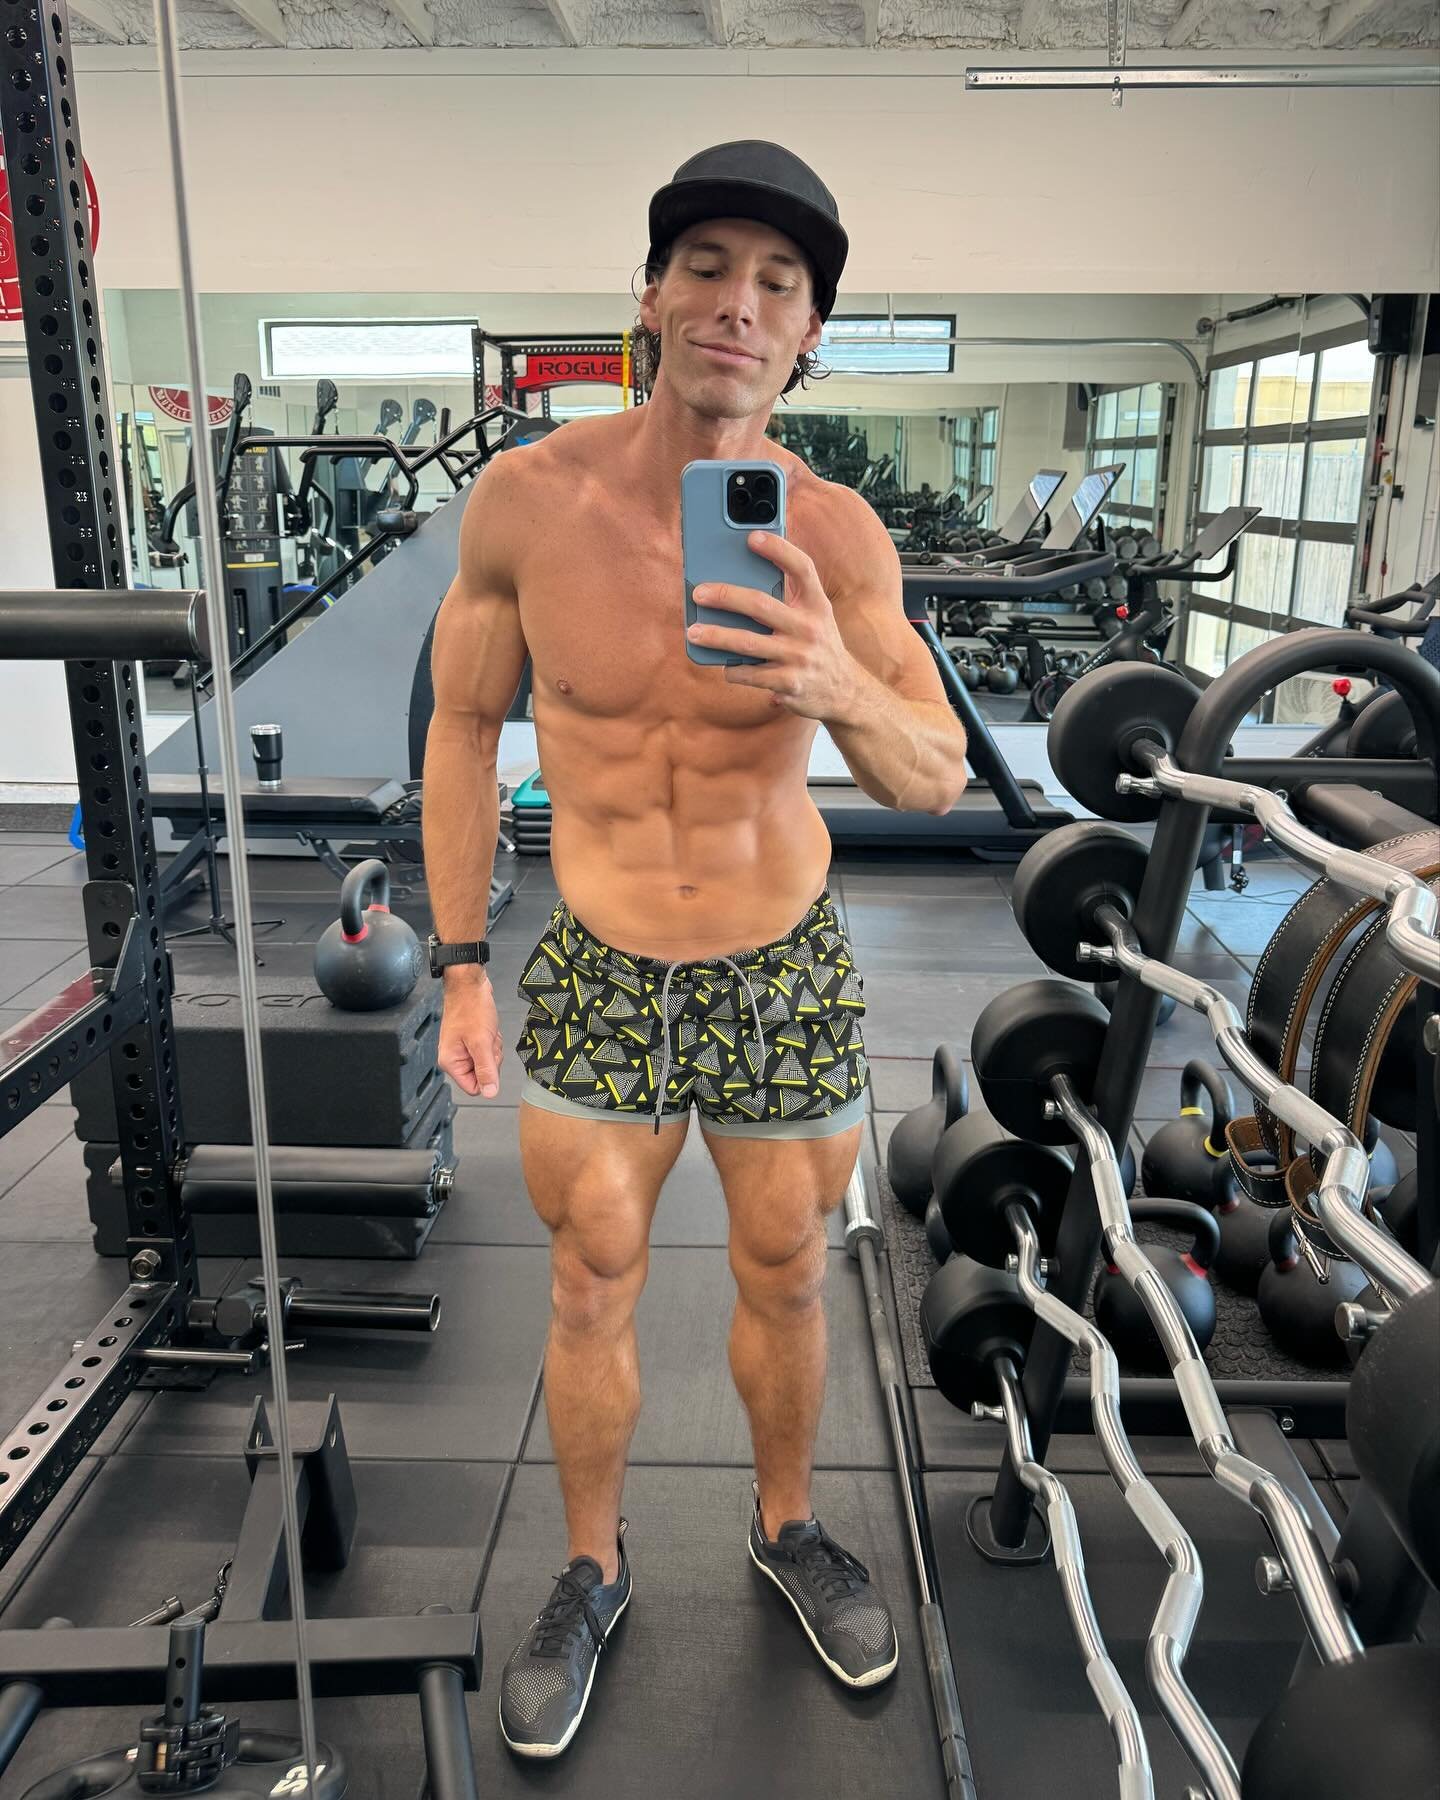 How I stay single digit body fat year round at 40 years old.

Diet: As boring as it may sound for some of you, I eat pretty much the same thing every day. The only exception to this is usually the weekends, which often means pizza &amp; ice cream. 🤤